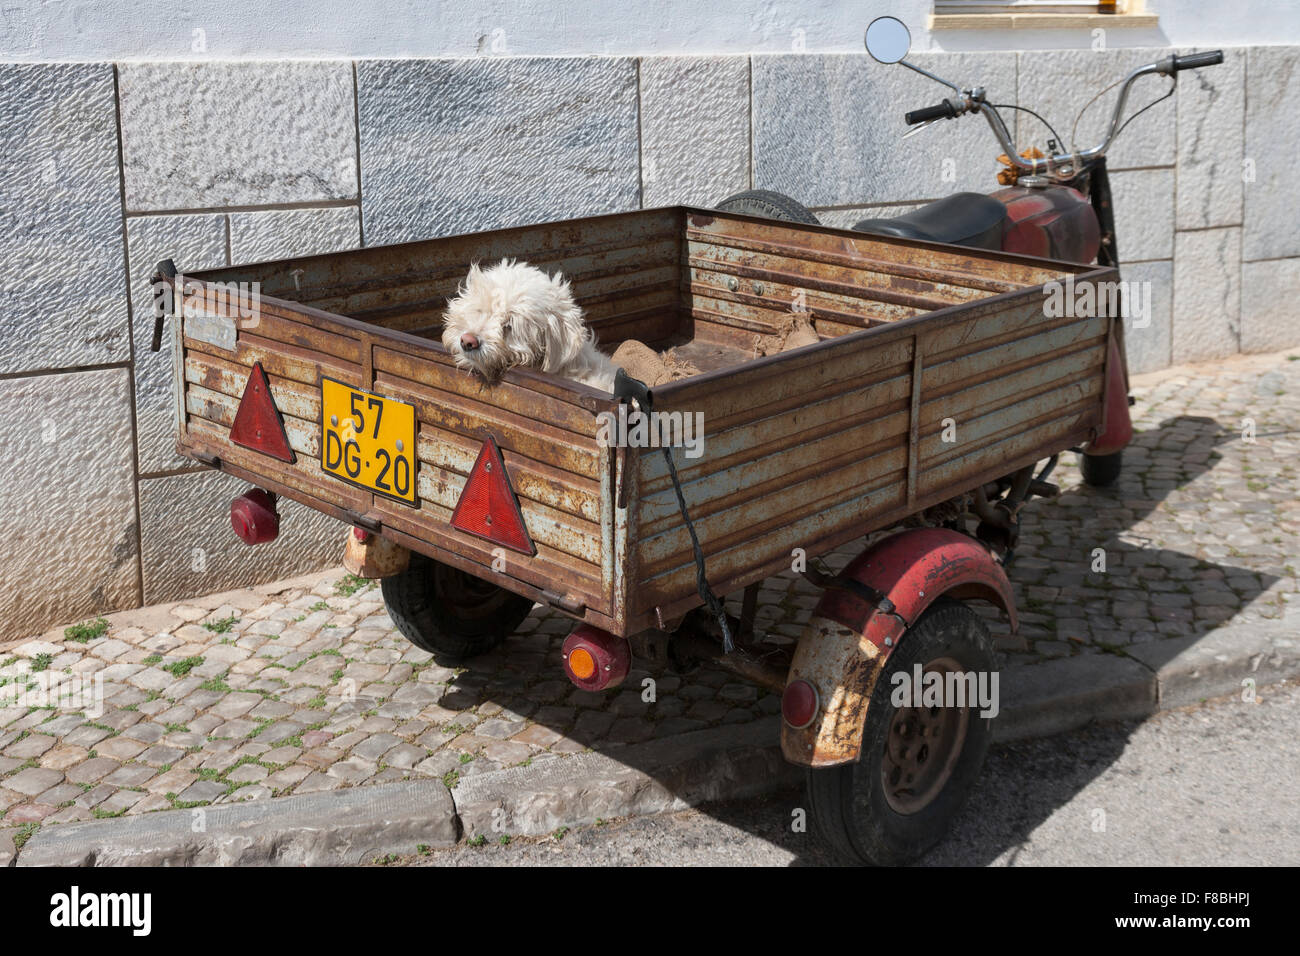 Small white dog in truck on motorcycle, Estoi, Portugal. Stock Photo